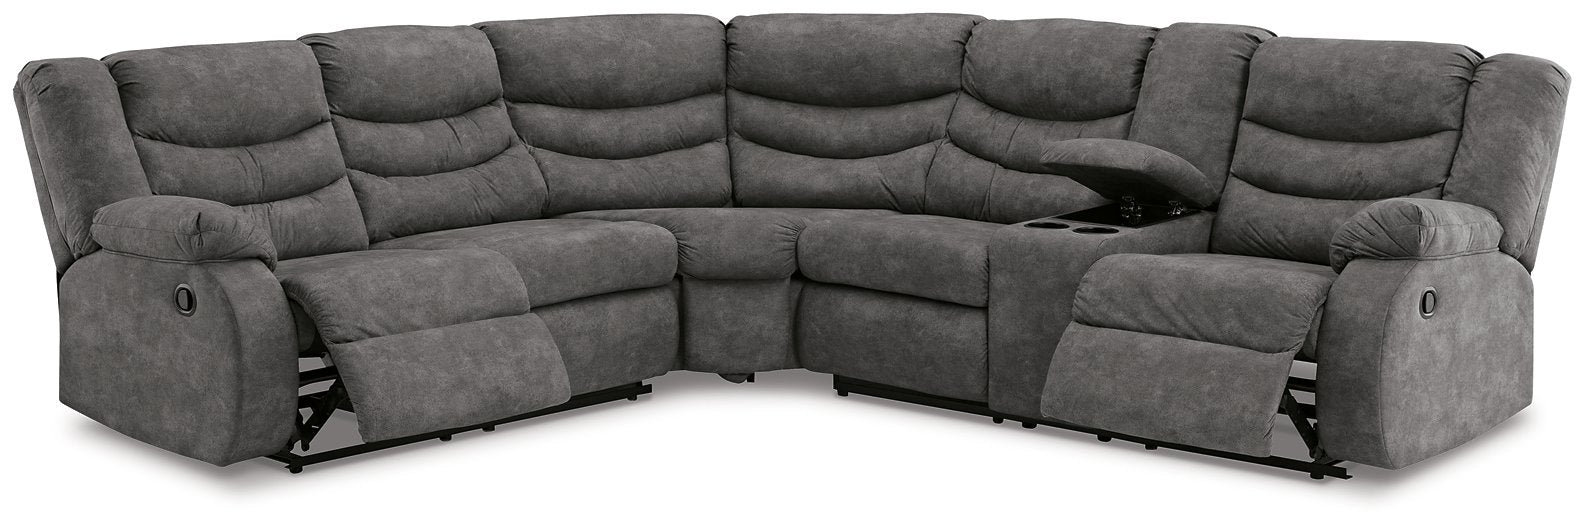 Partymate Living Room Set